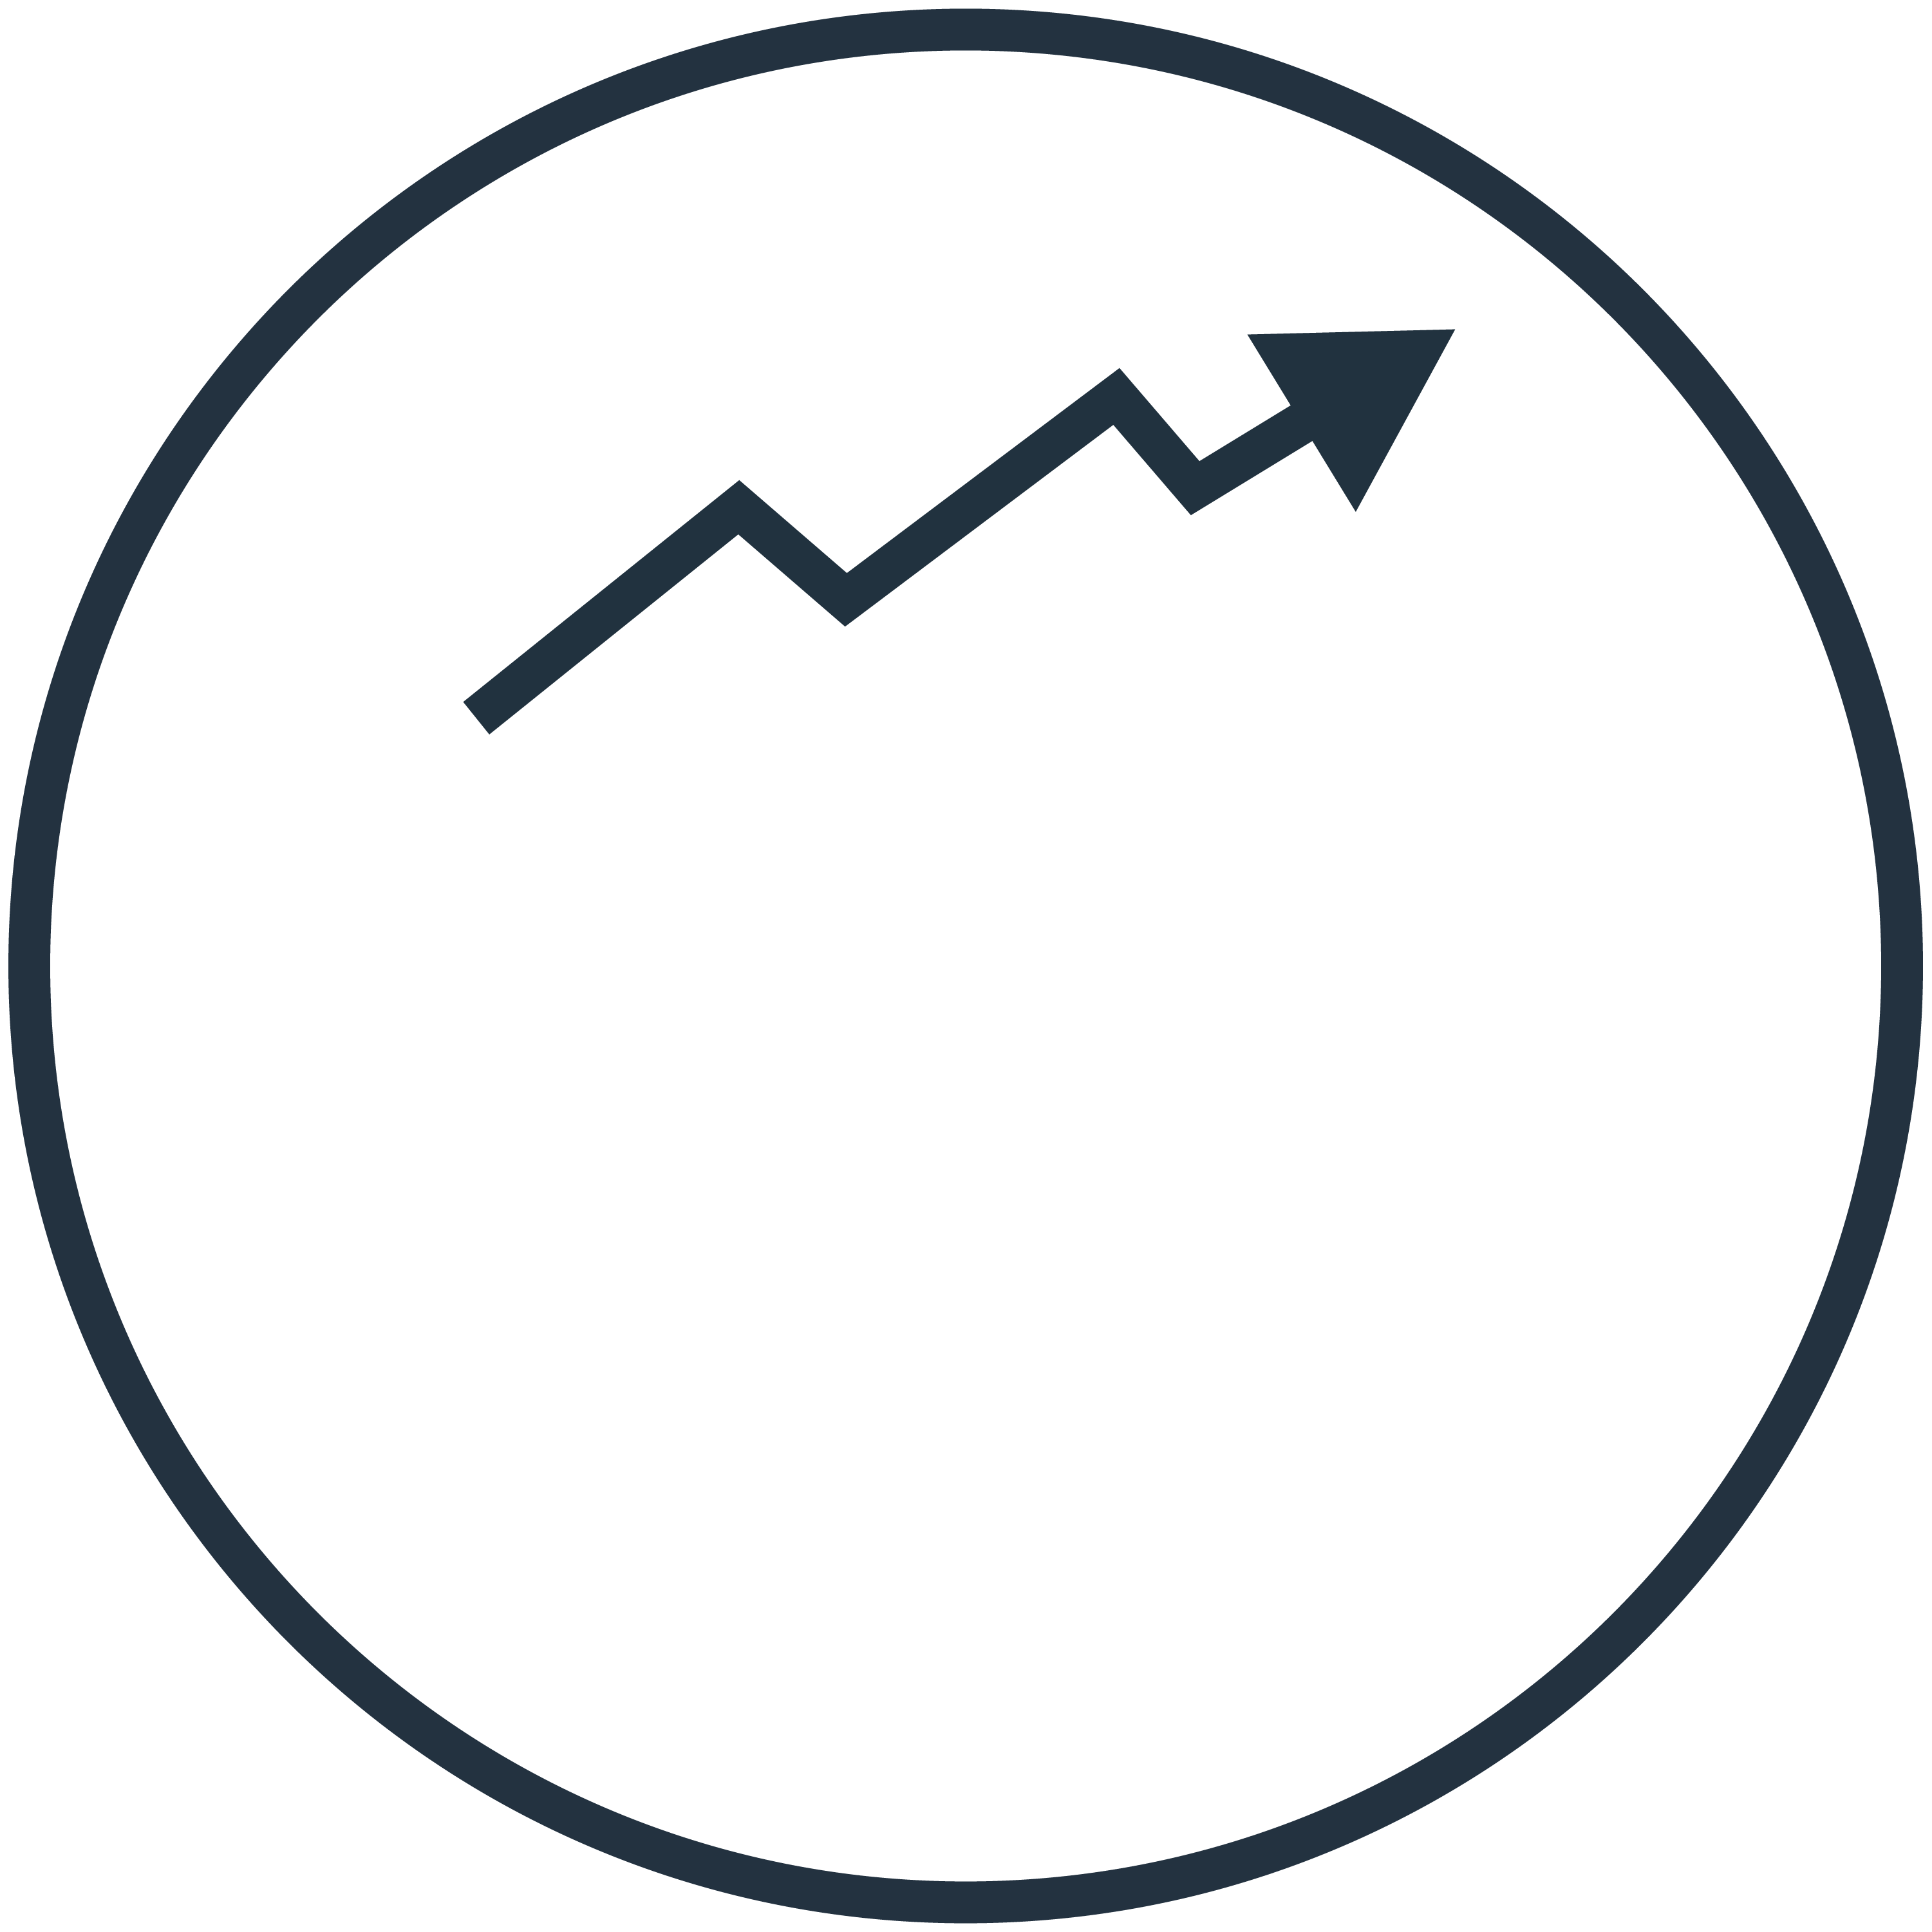 Two buble stick figures with a rising graph arrow above their heads